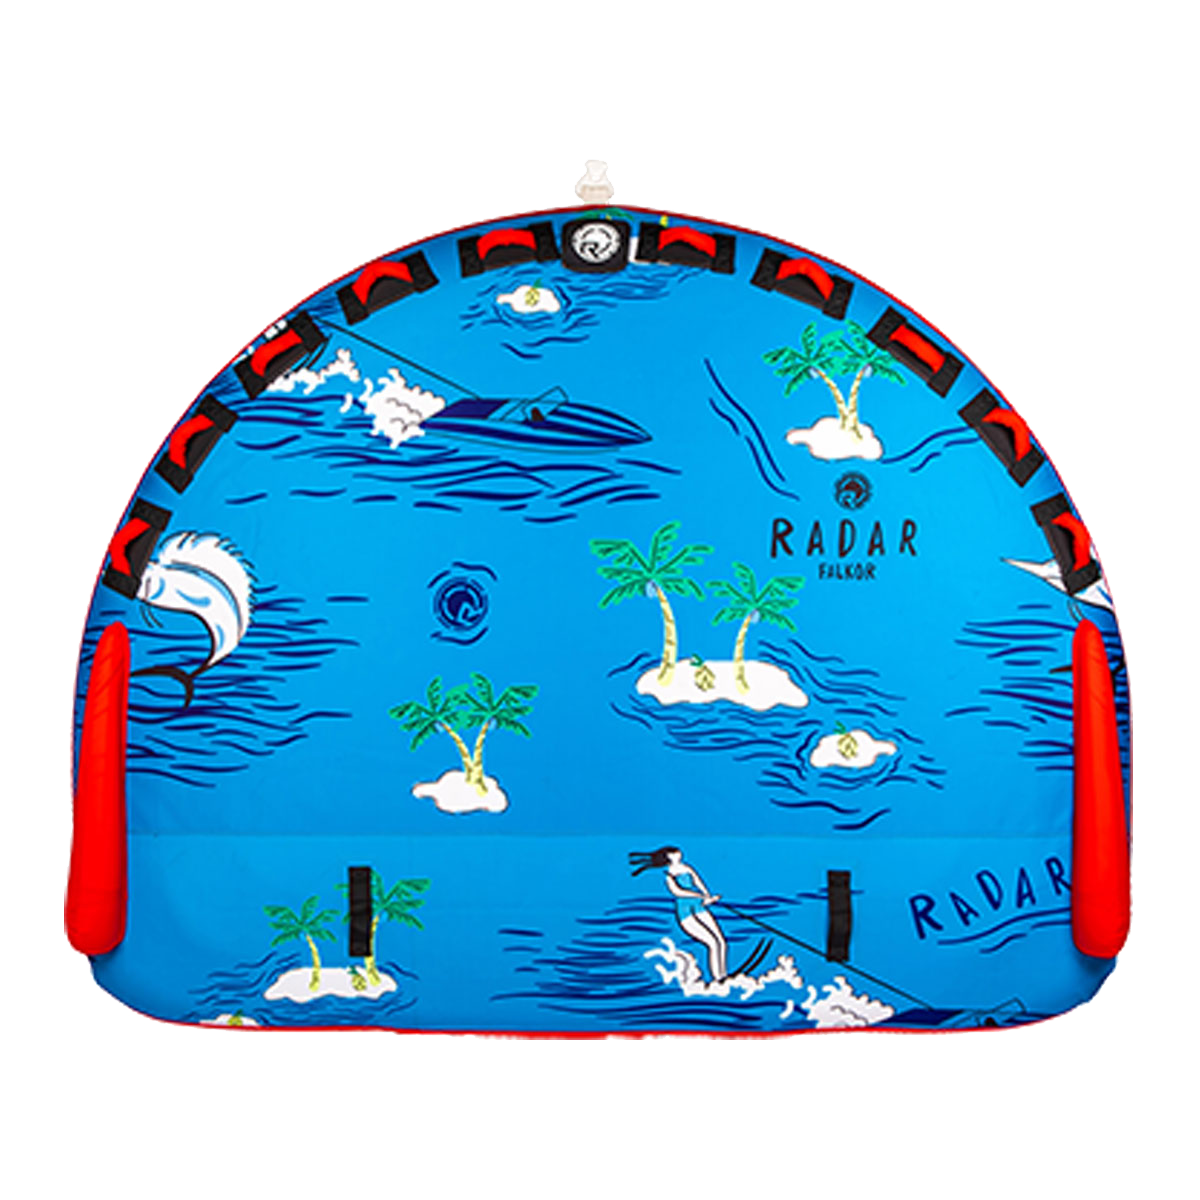 A blue Radar bag with palm trees and Falkor's Deck Series on it.